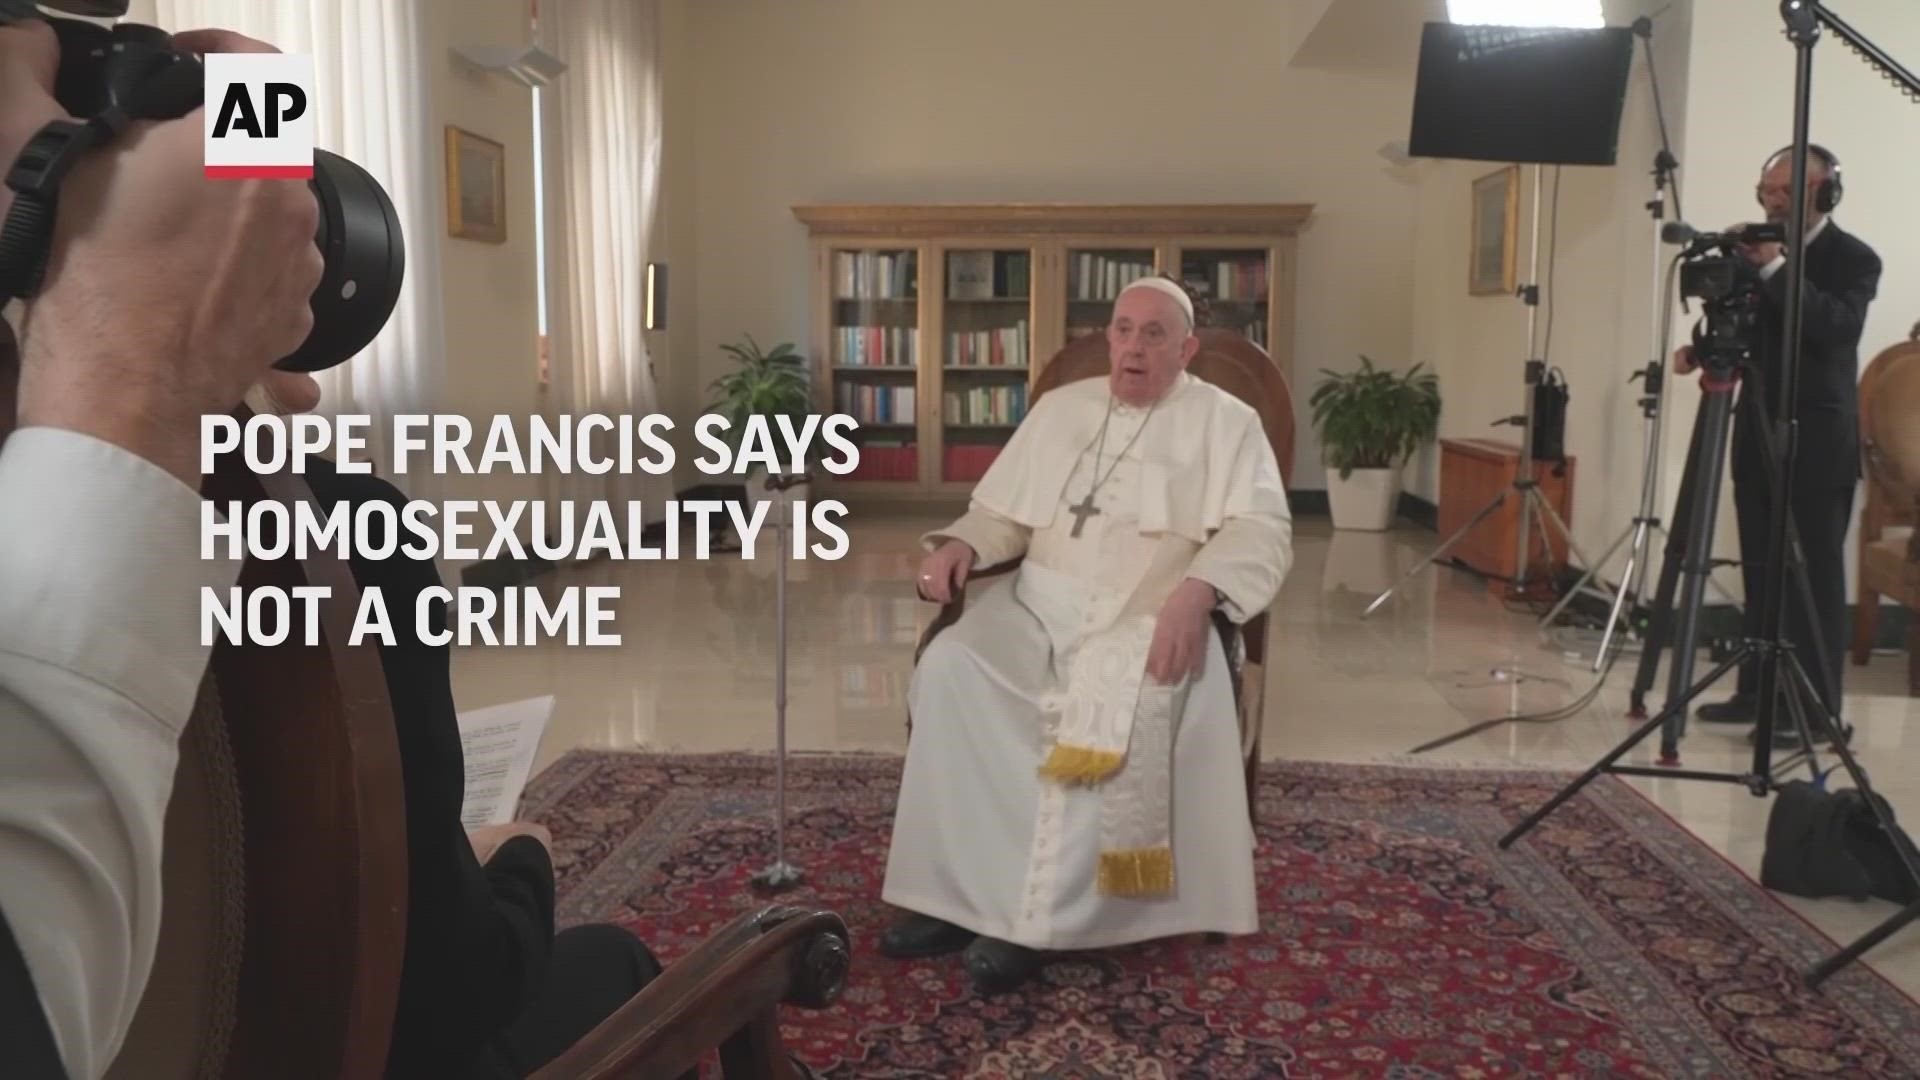 During an interview, Pope Francis criticized laws that criminalize homosexuality as "unjust," and said God loves all his children, just as they are.